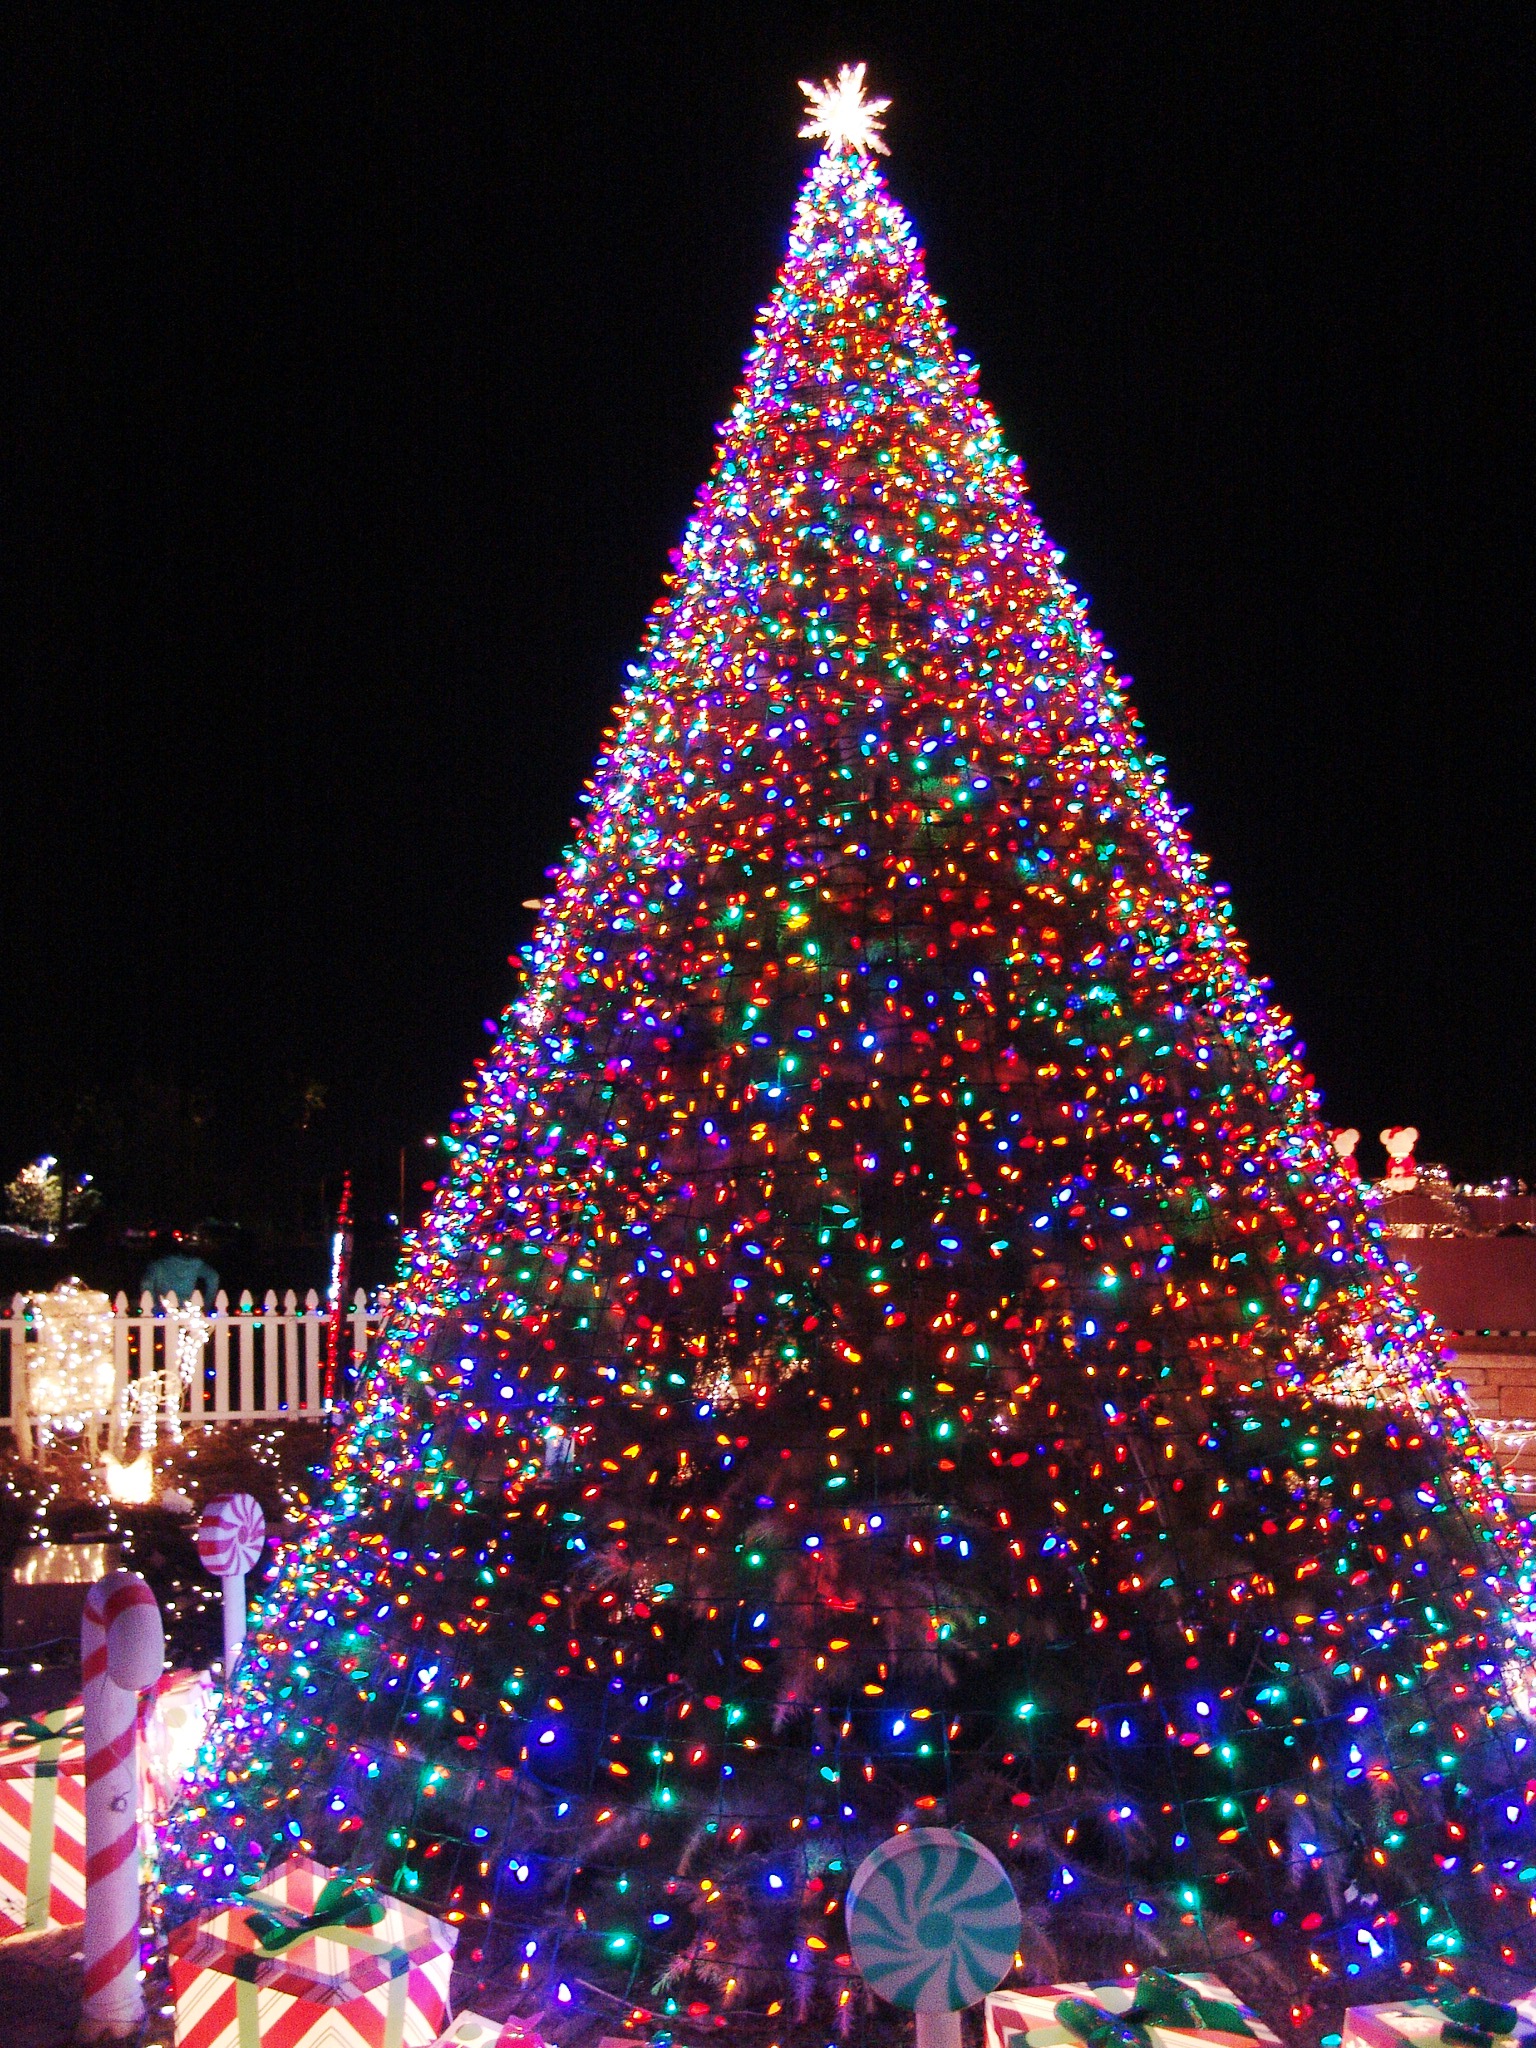 11 Awesome And Dazzling Christmas Tree Lights Ideas Awesome 11